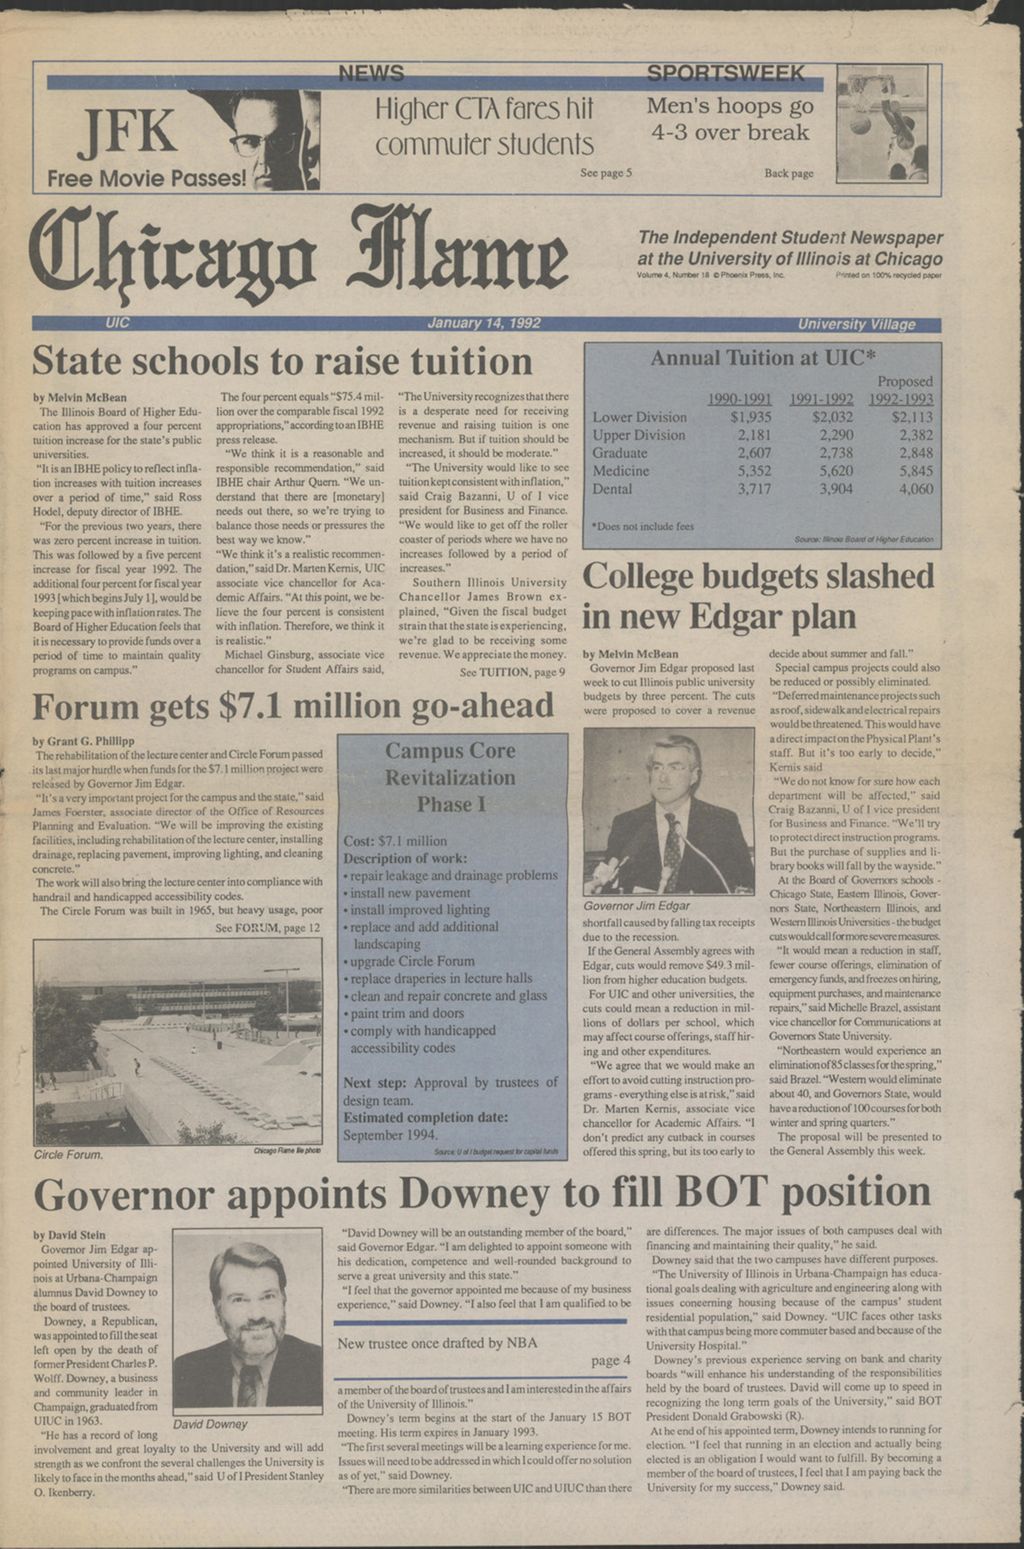 Chicago Flame (January 14, 1992)